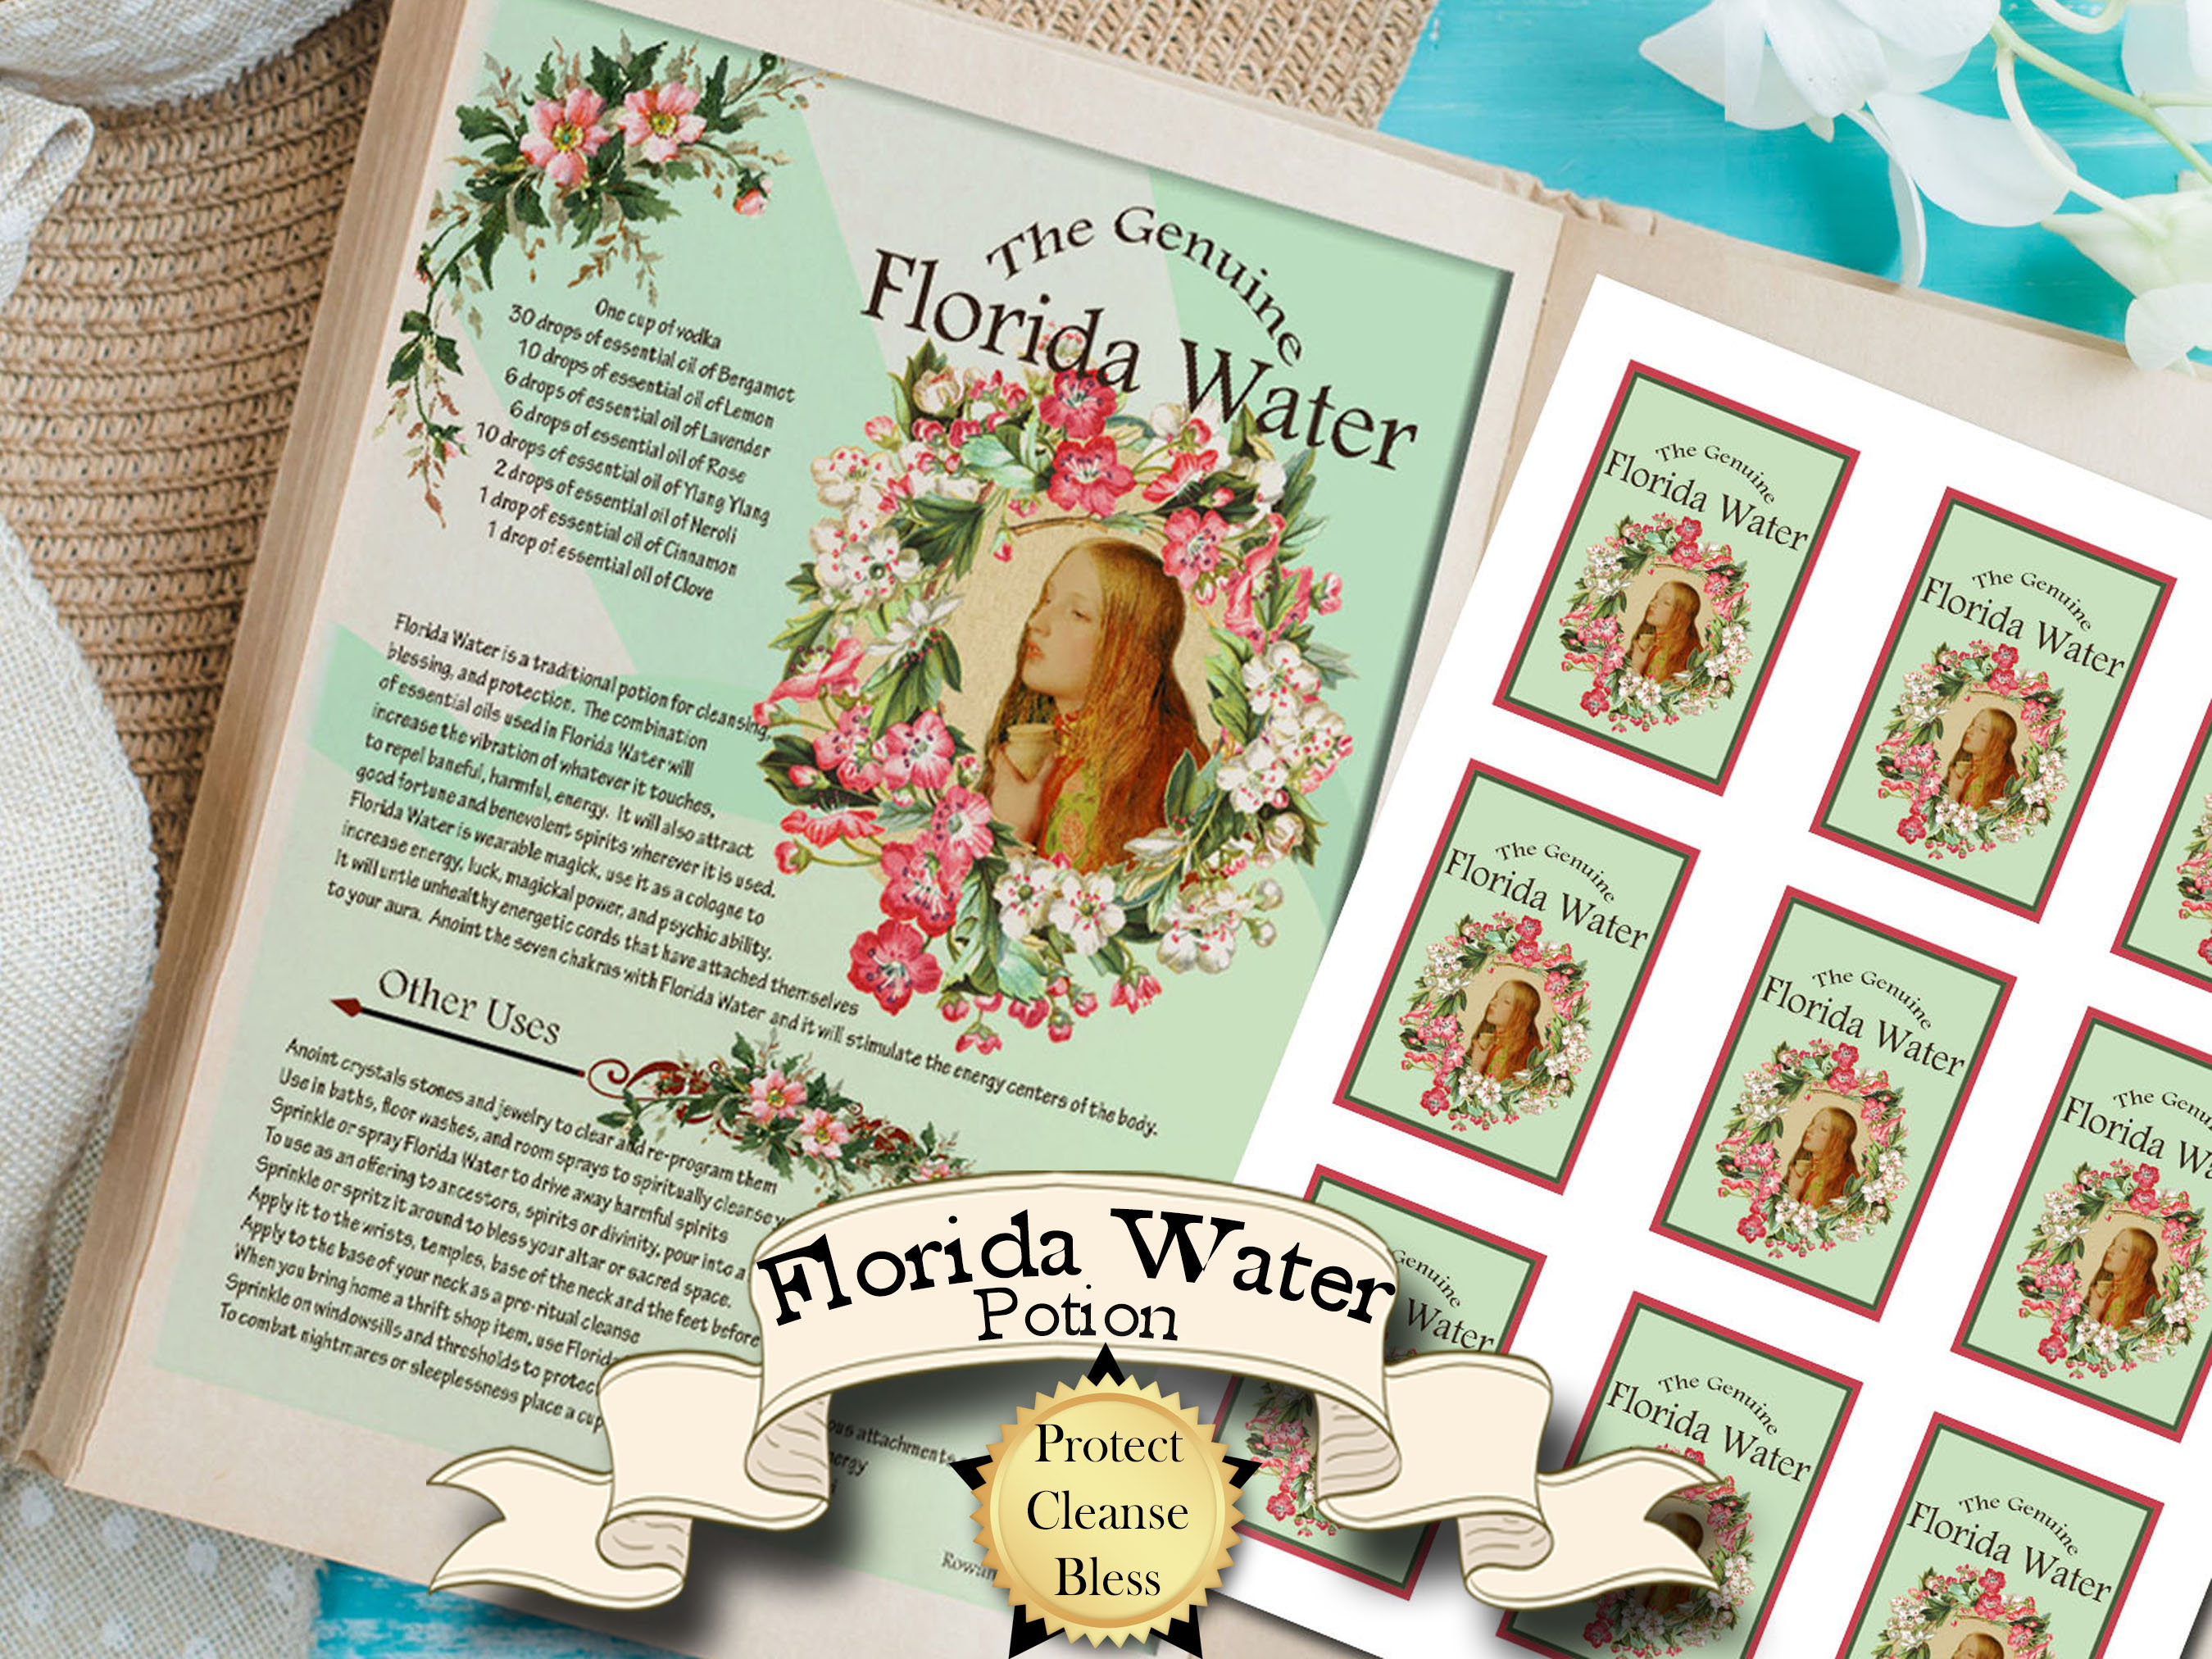 FLORIDA WATER COLOGNE Printable Recipe With Bonus Labels, for